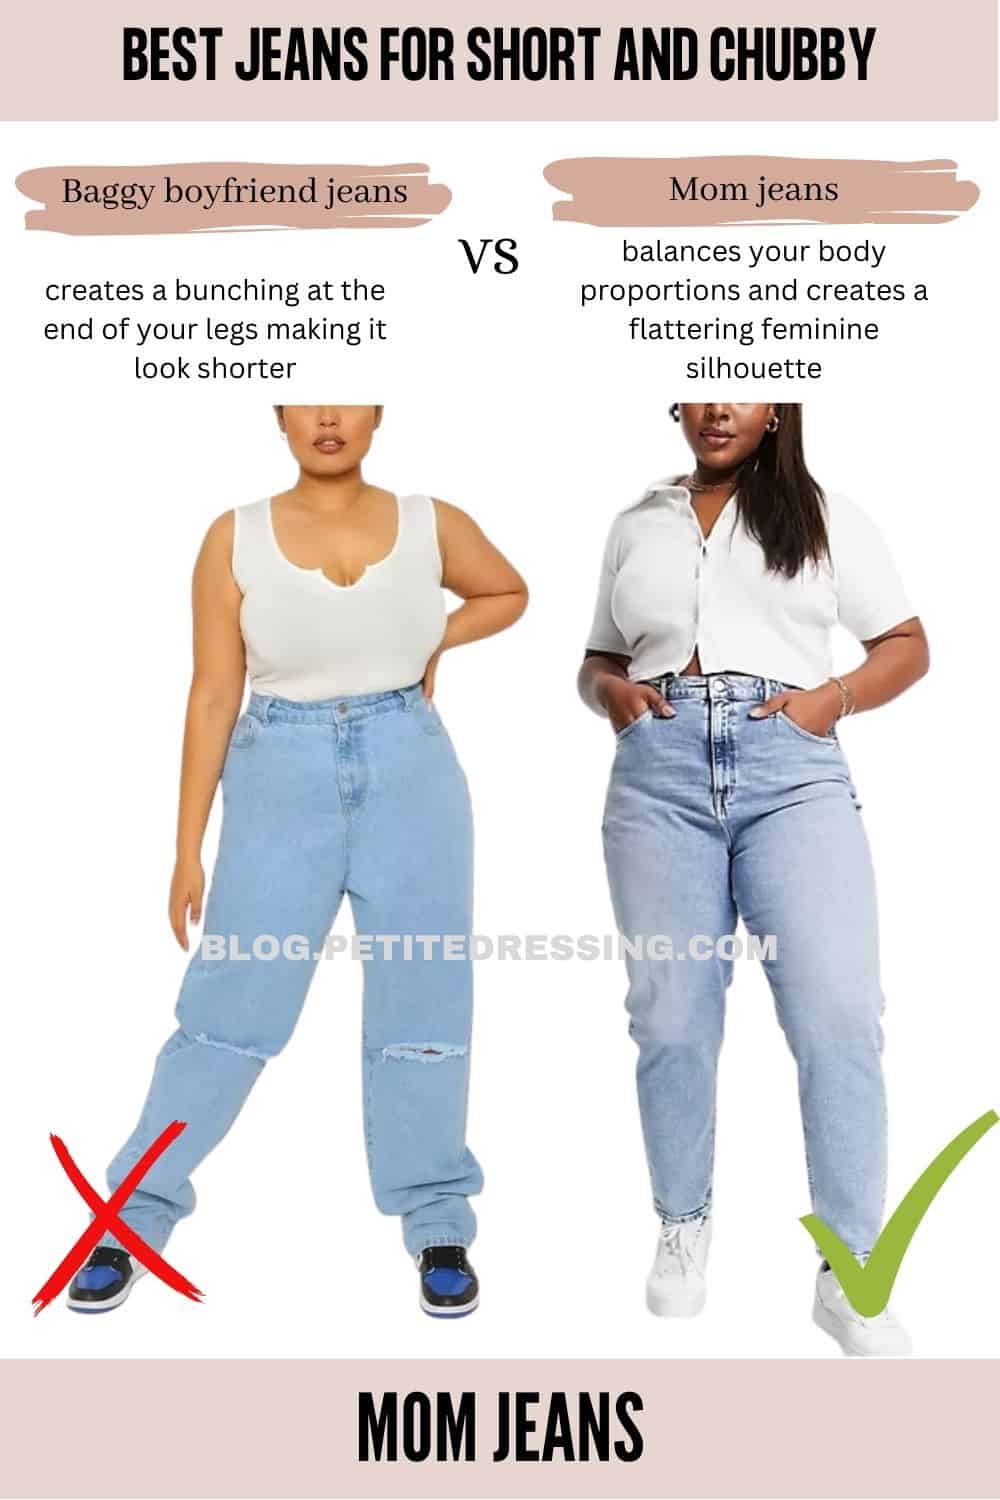 Jeans guide for short and chubby